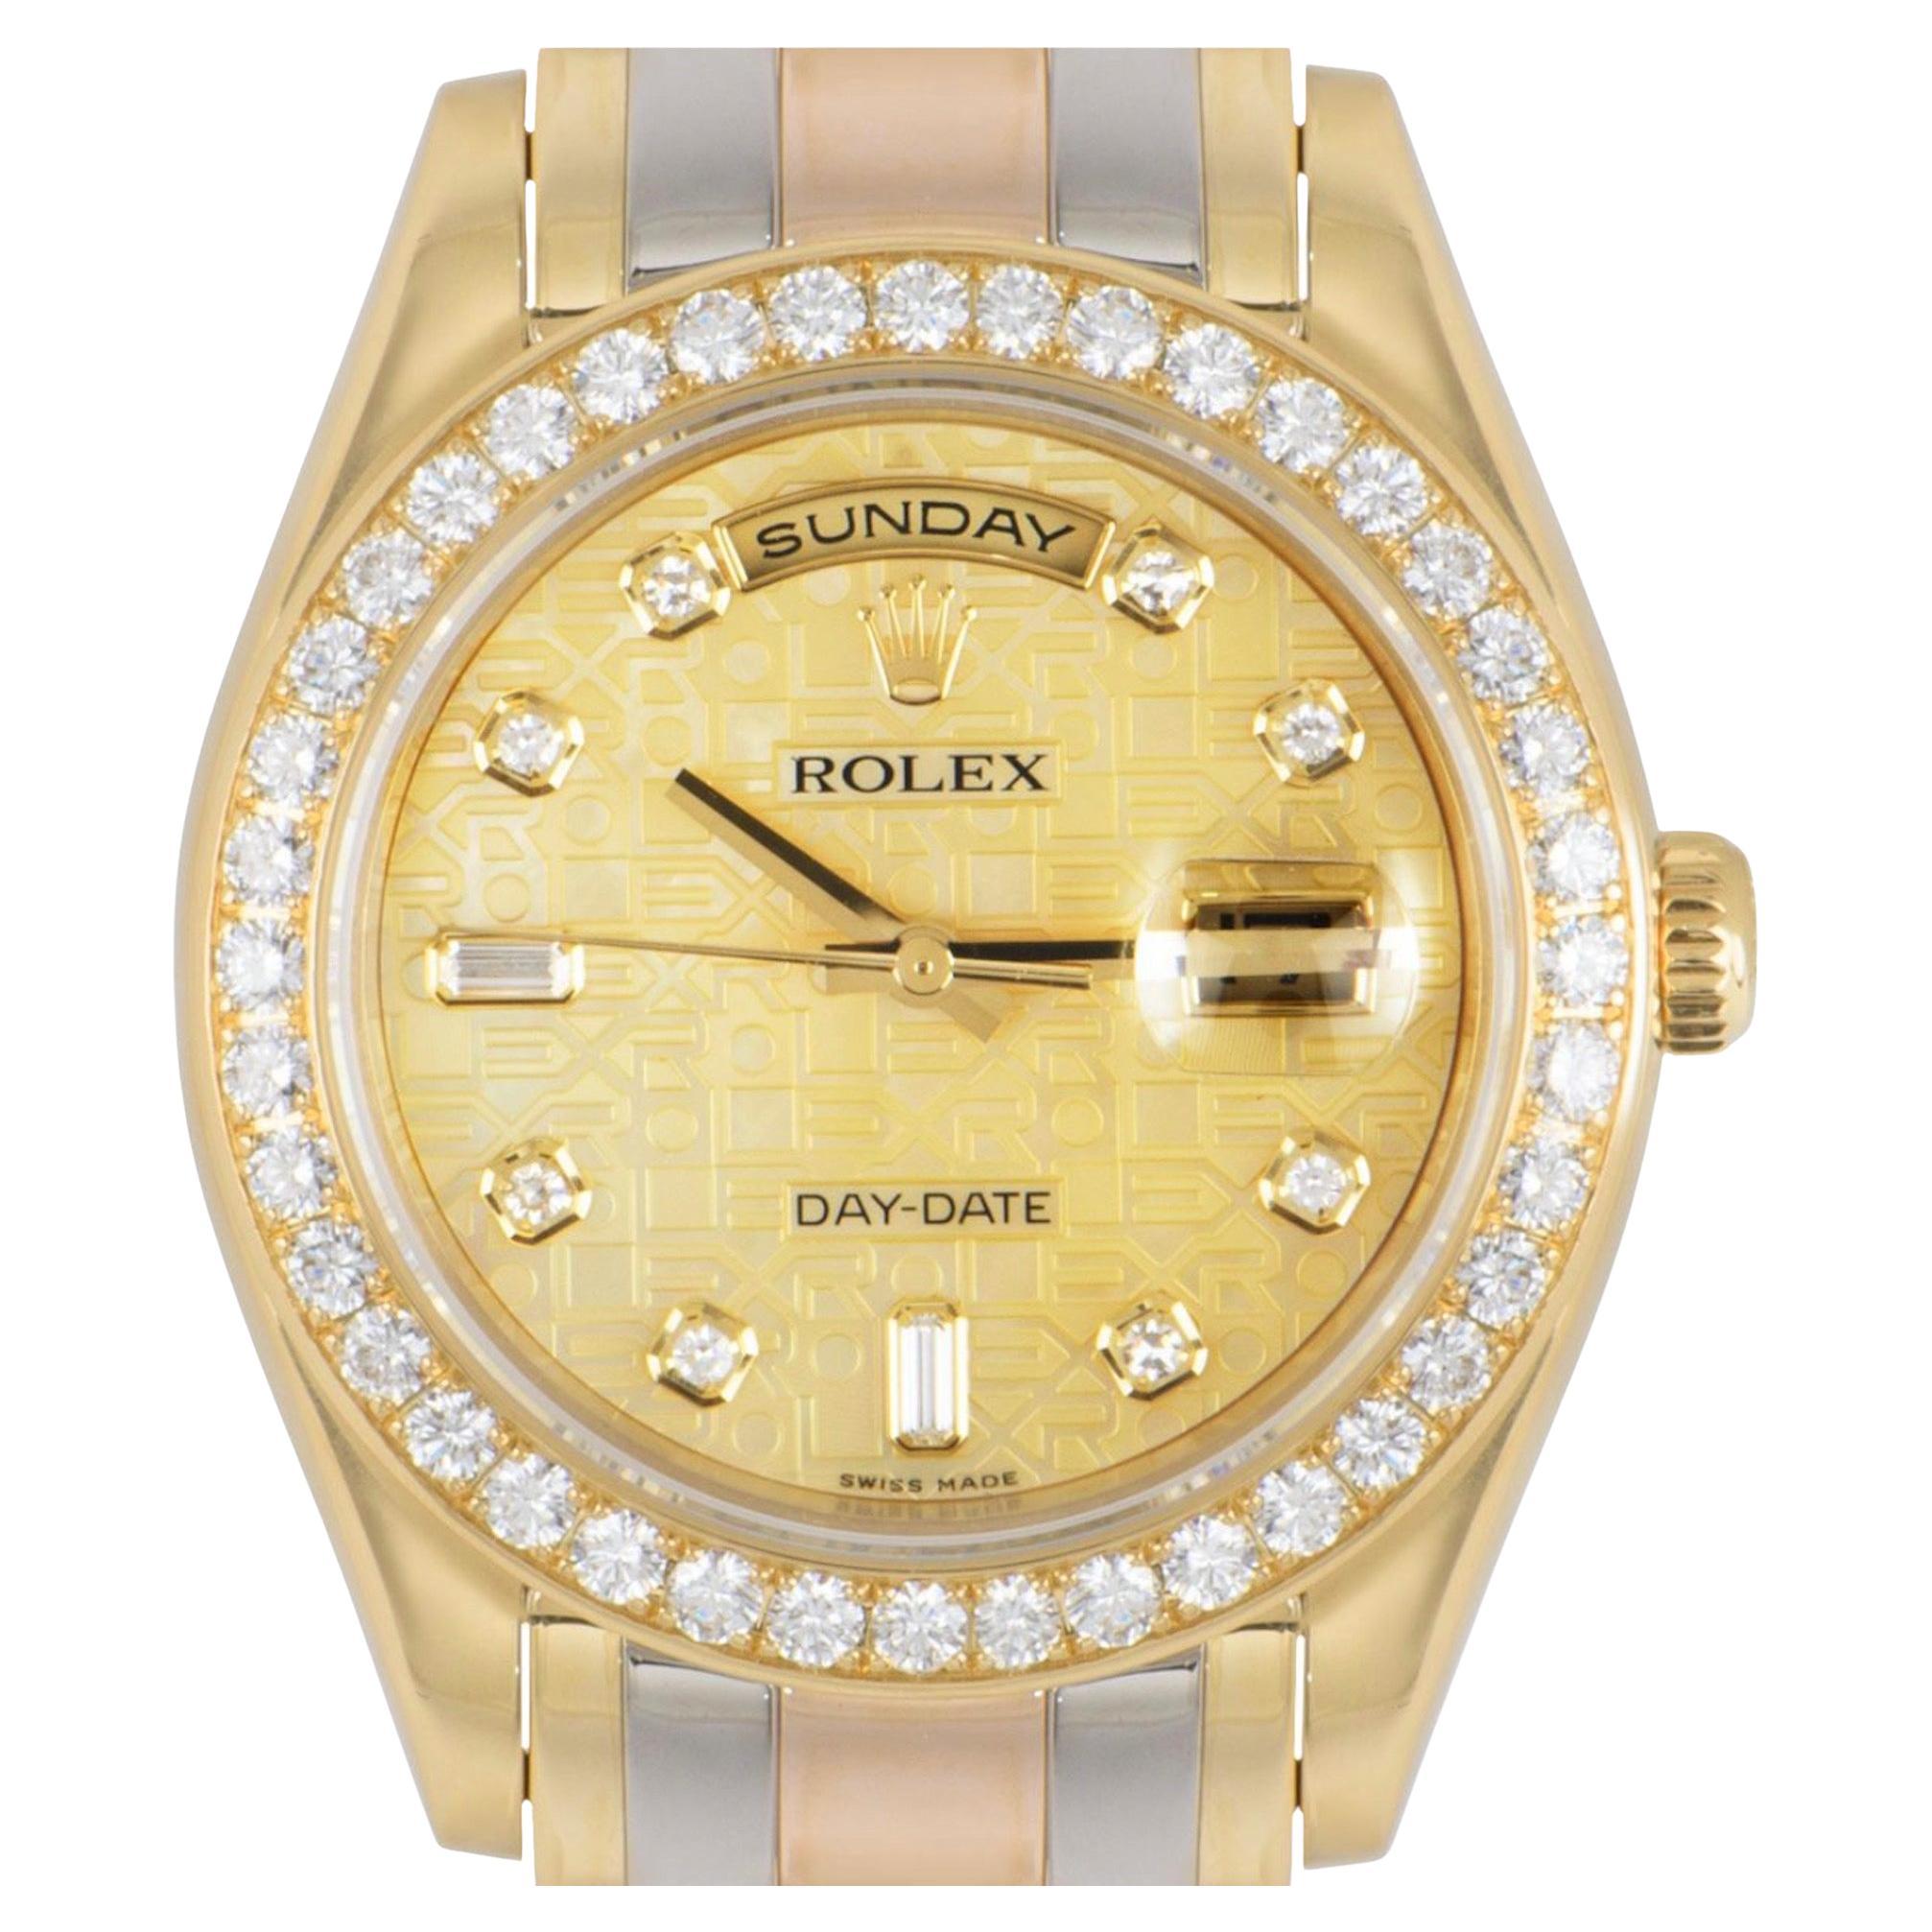 A stunning Day-Date Masterpiece crafted in tri-gold by Rolex. Features a mother of pearl jubilee dial with 8 single cut diamonds and 2 baguette cut diamond hour markers. Complementing the dial is a yellow gold bezel set with 40 round brilliant cut